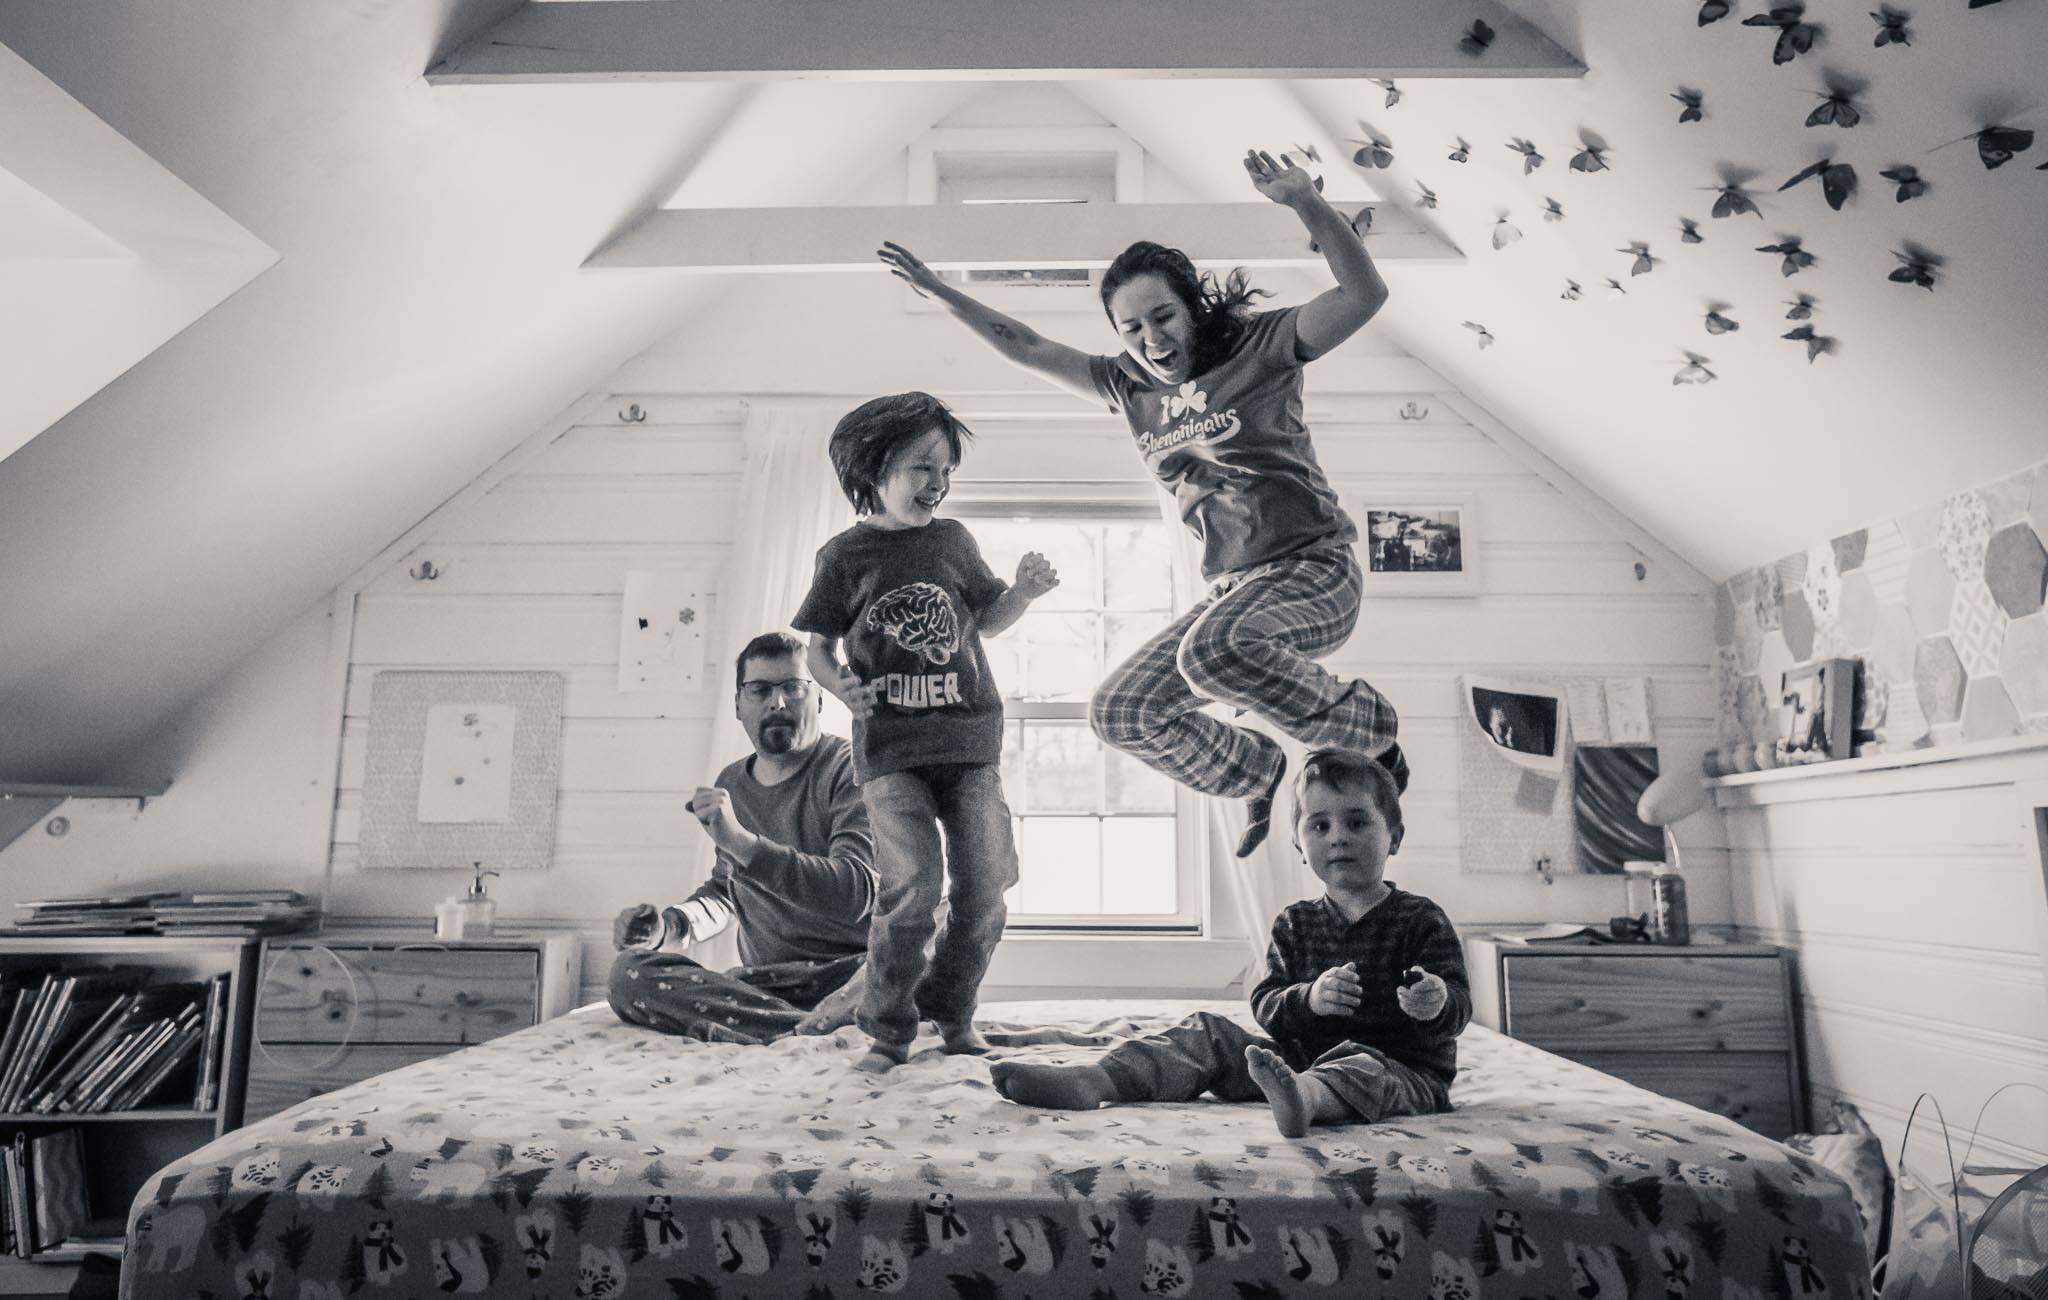 family jumping on bed